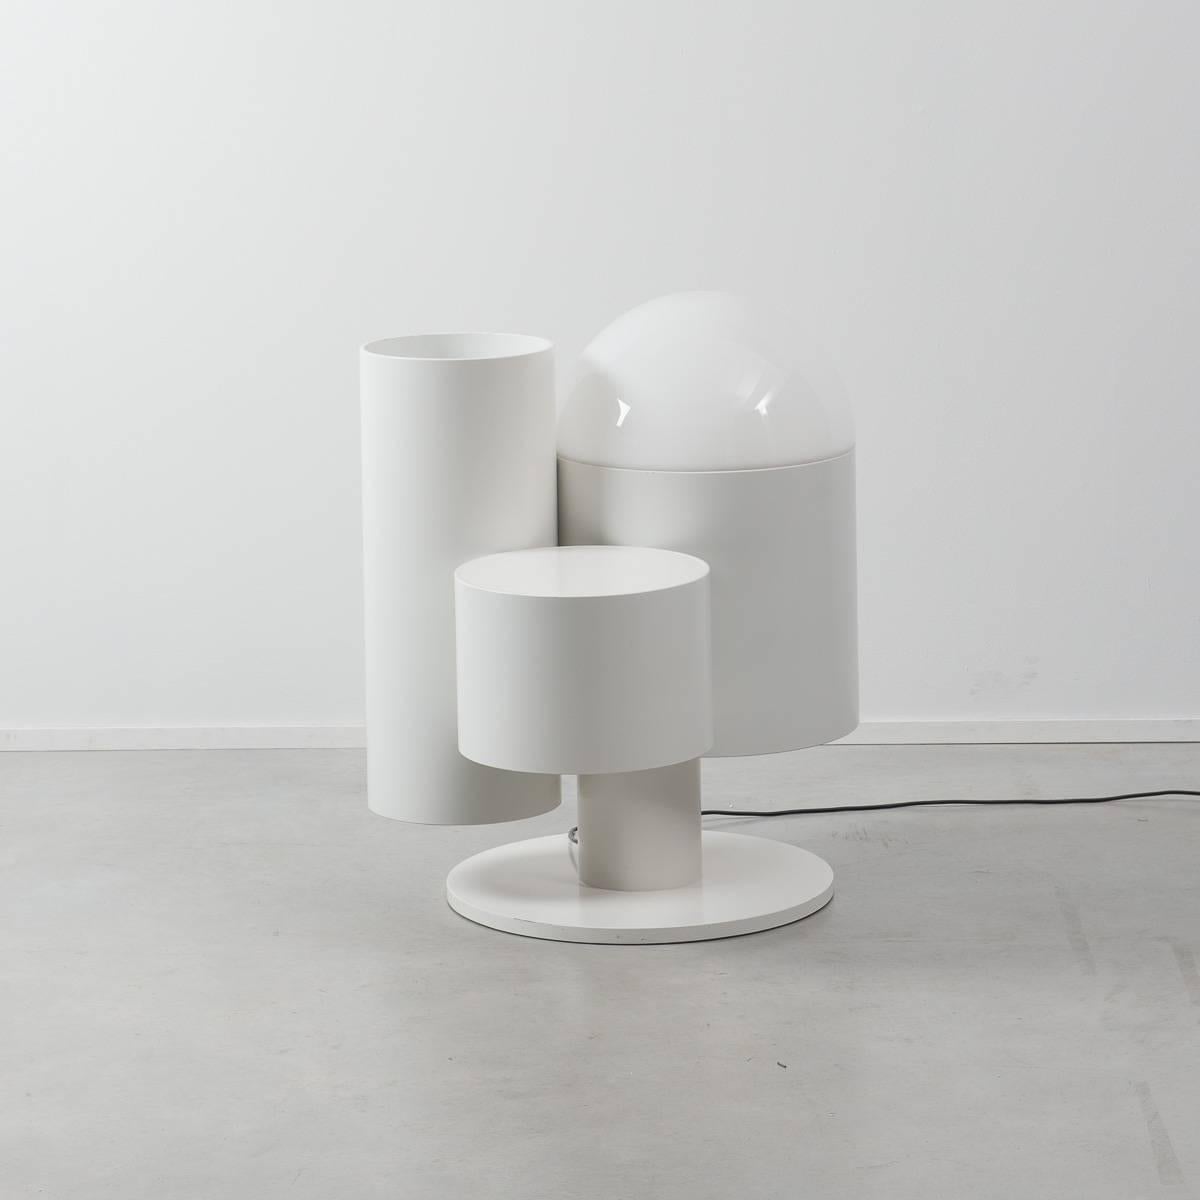 Post-Modern Close Encounter Lamp and Plant Stand, Kerst Koopman, Netherlands, 1988